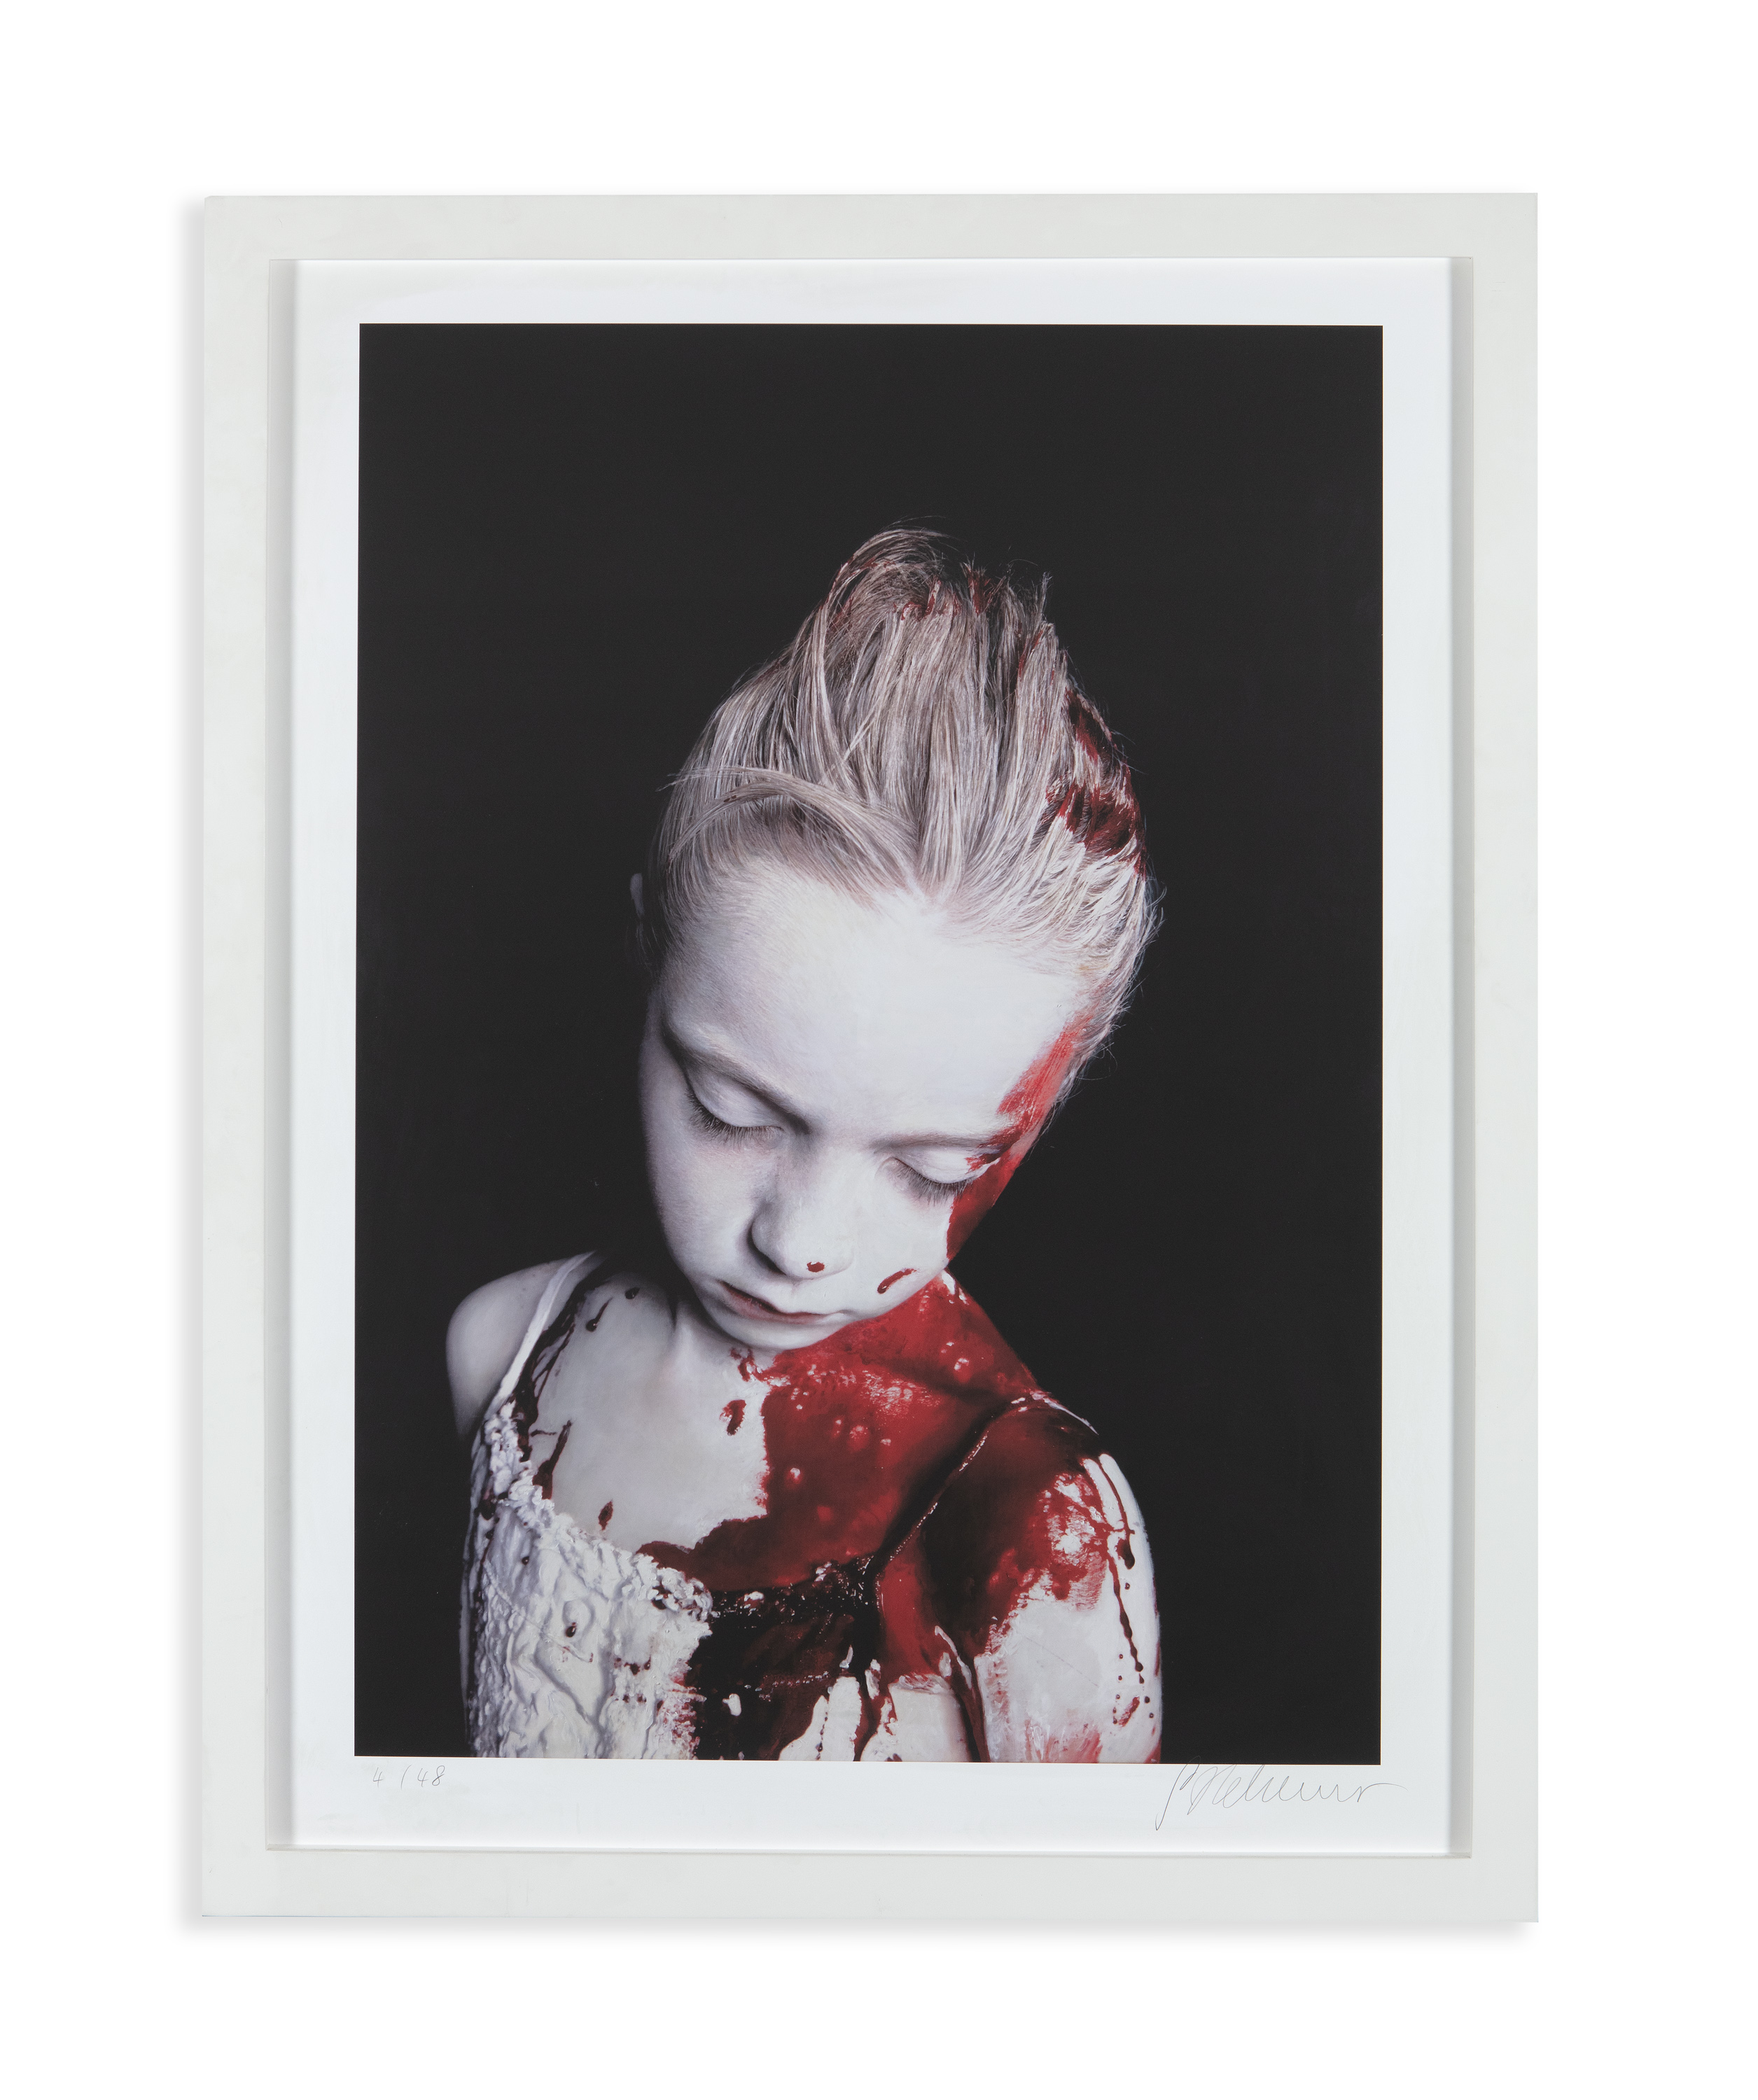 GOTTFRIED HELNWEIN (B. 1948) The Disasters of War 13 Archival print, 100 x 70cm Signed, edition 4/